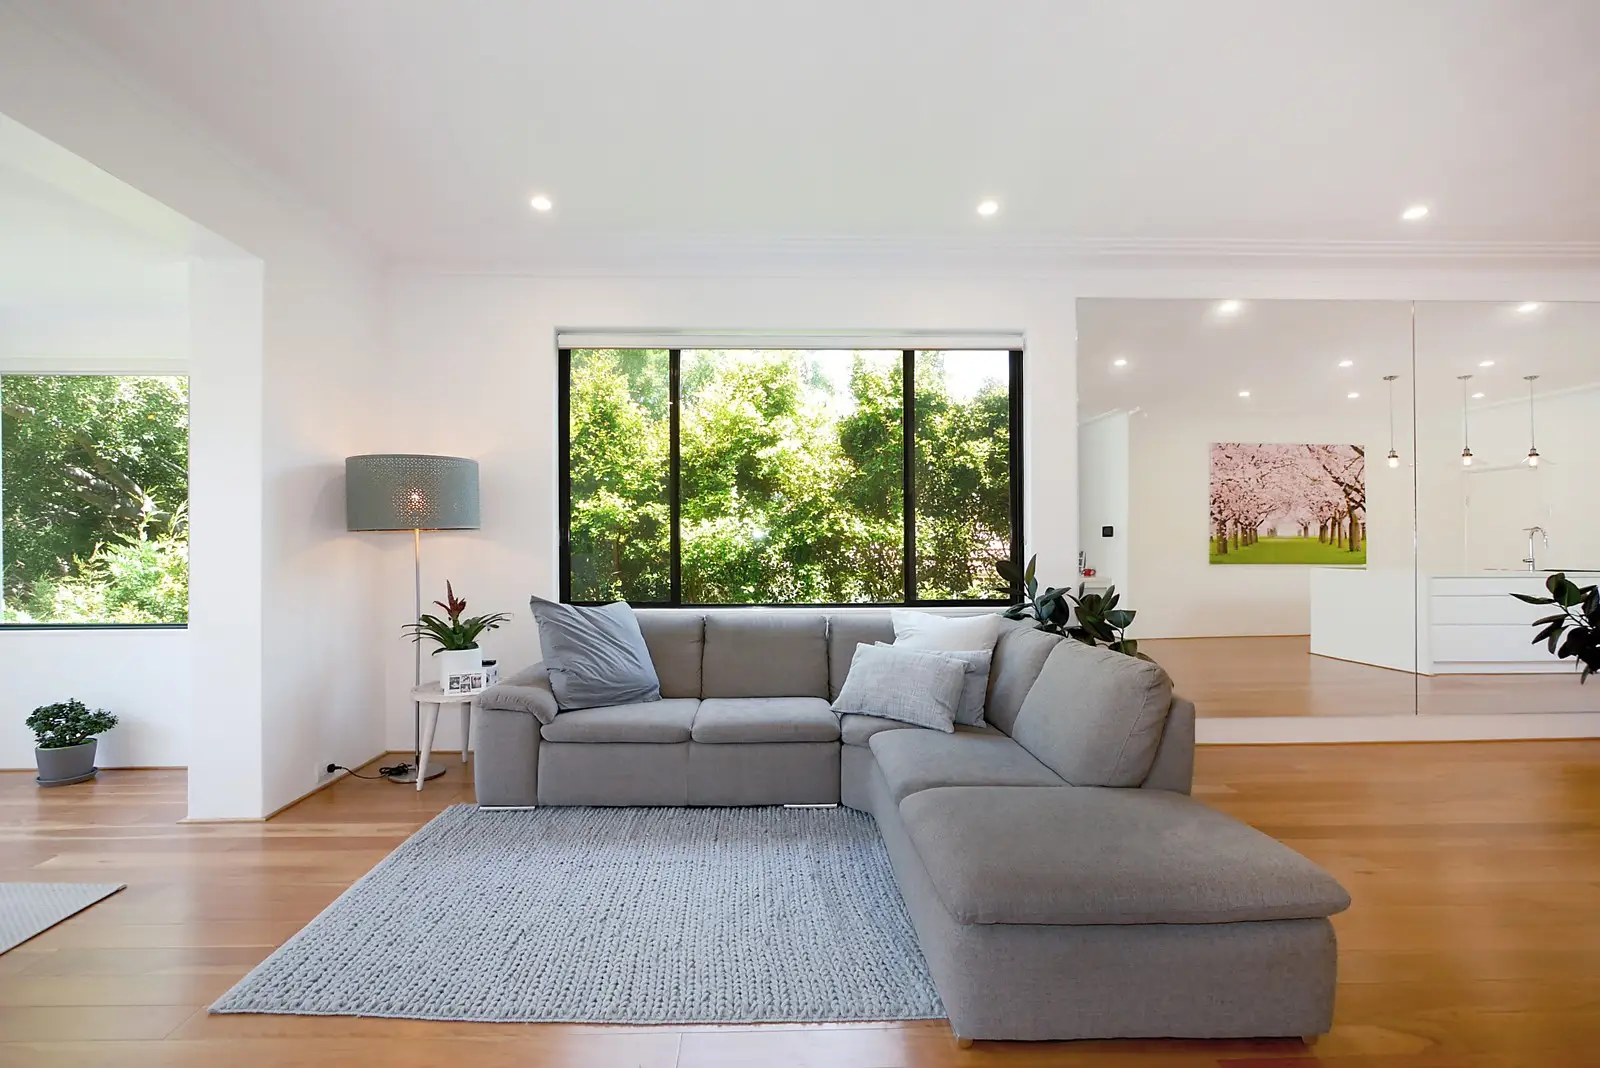 Photo #3: 38 Dudley Road, Rose Bay - Sold by Sydney Sotheby's International Realty